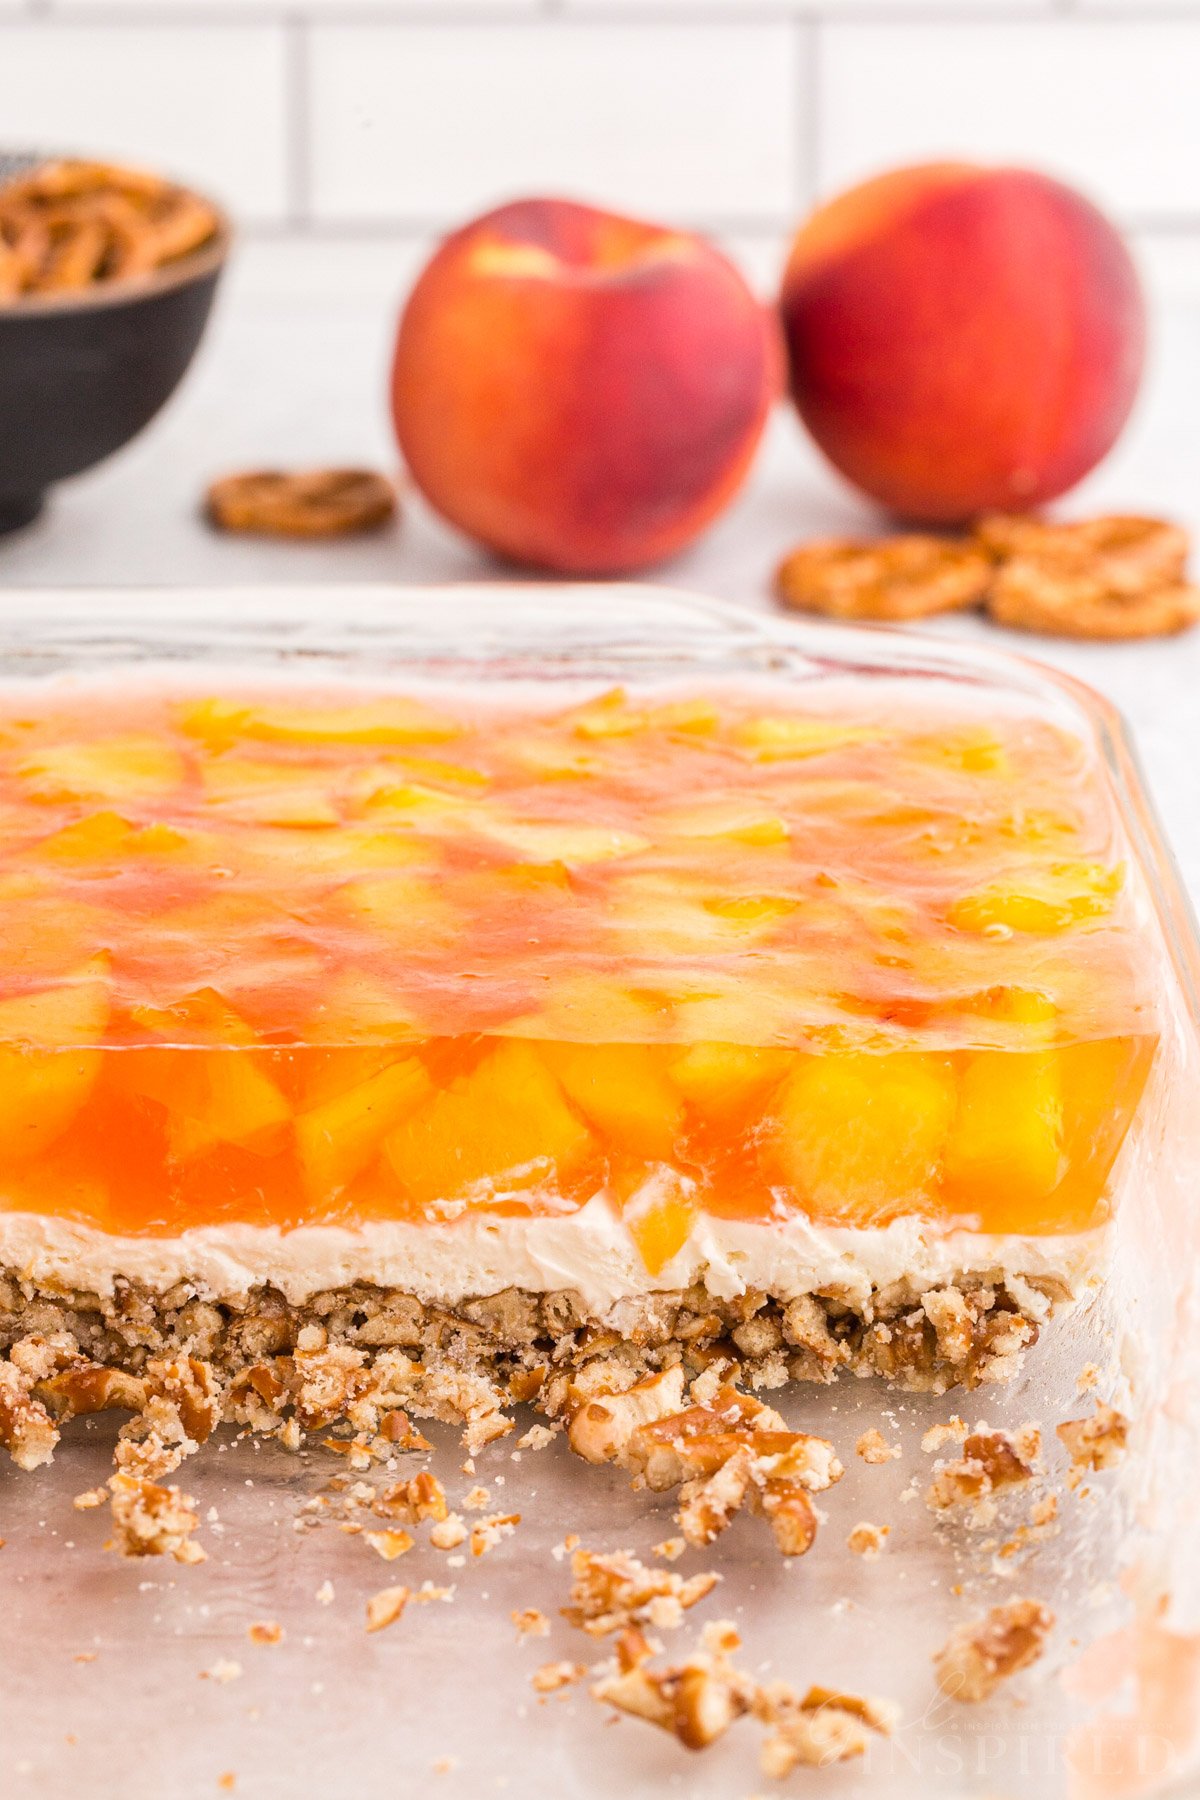 Side view of the peach pretzel salad showing the three layers: pretzel crust, creamy middle, and peach jello.